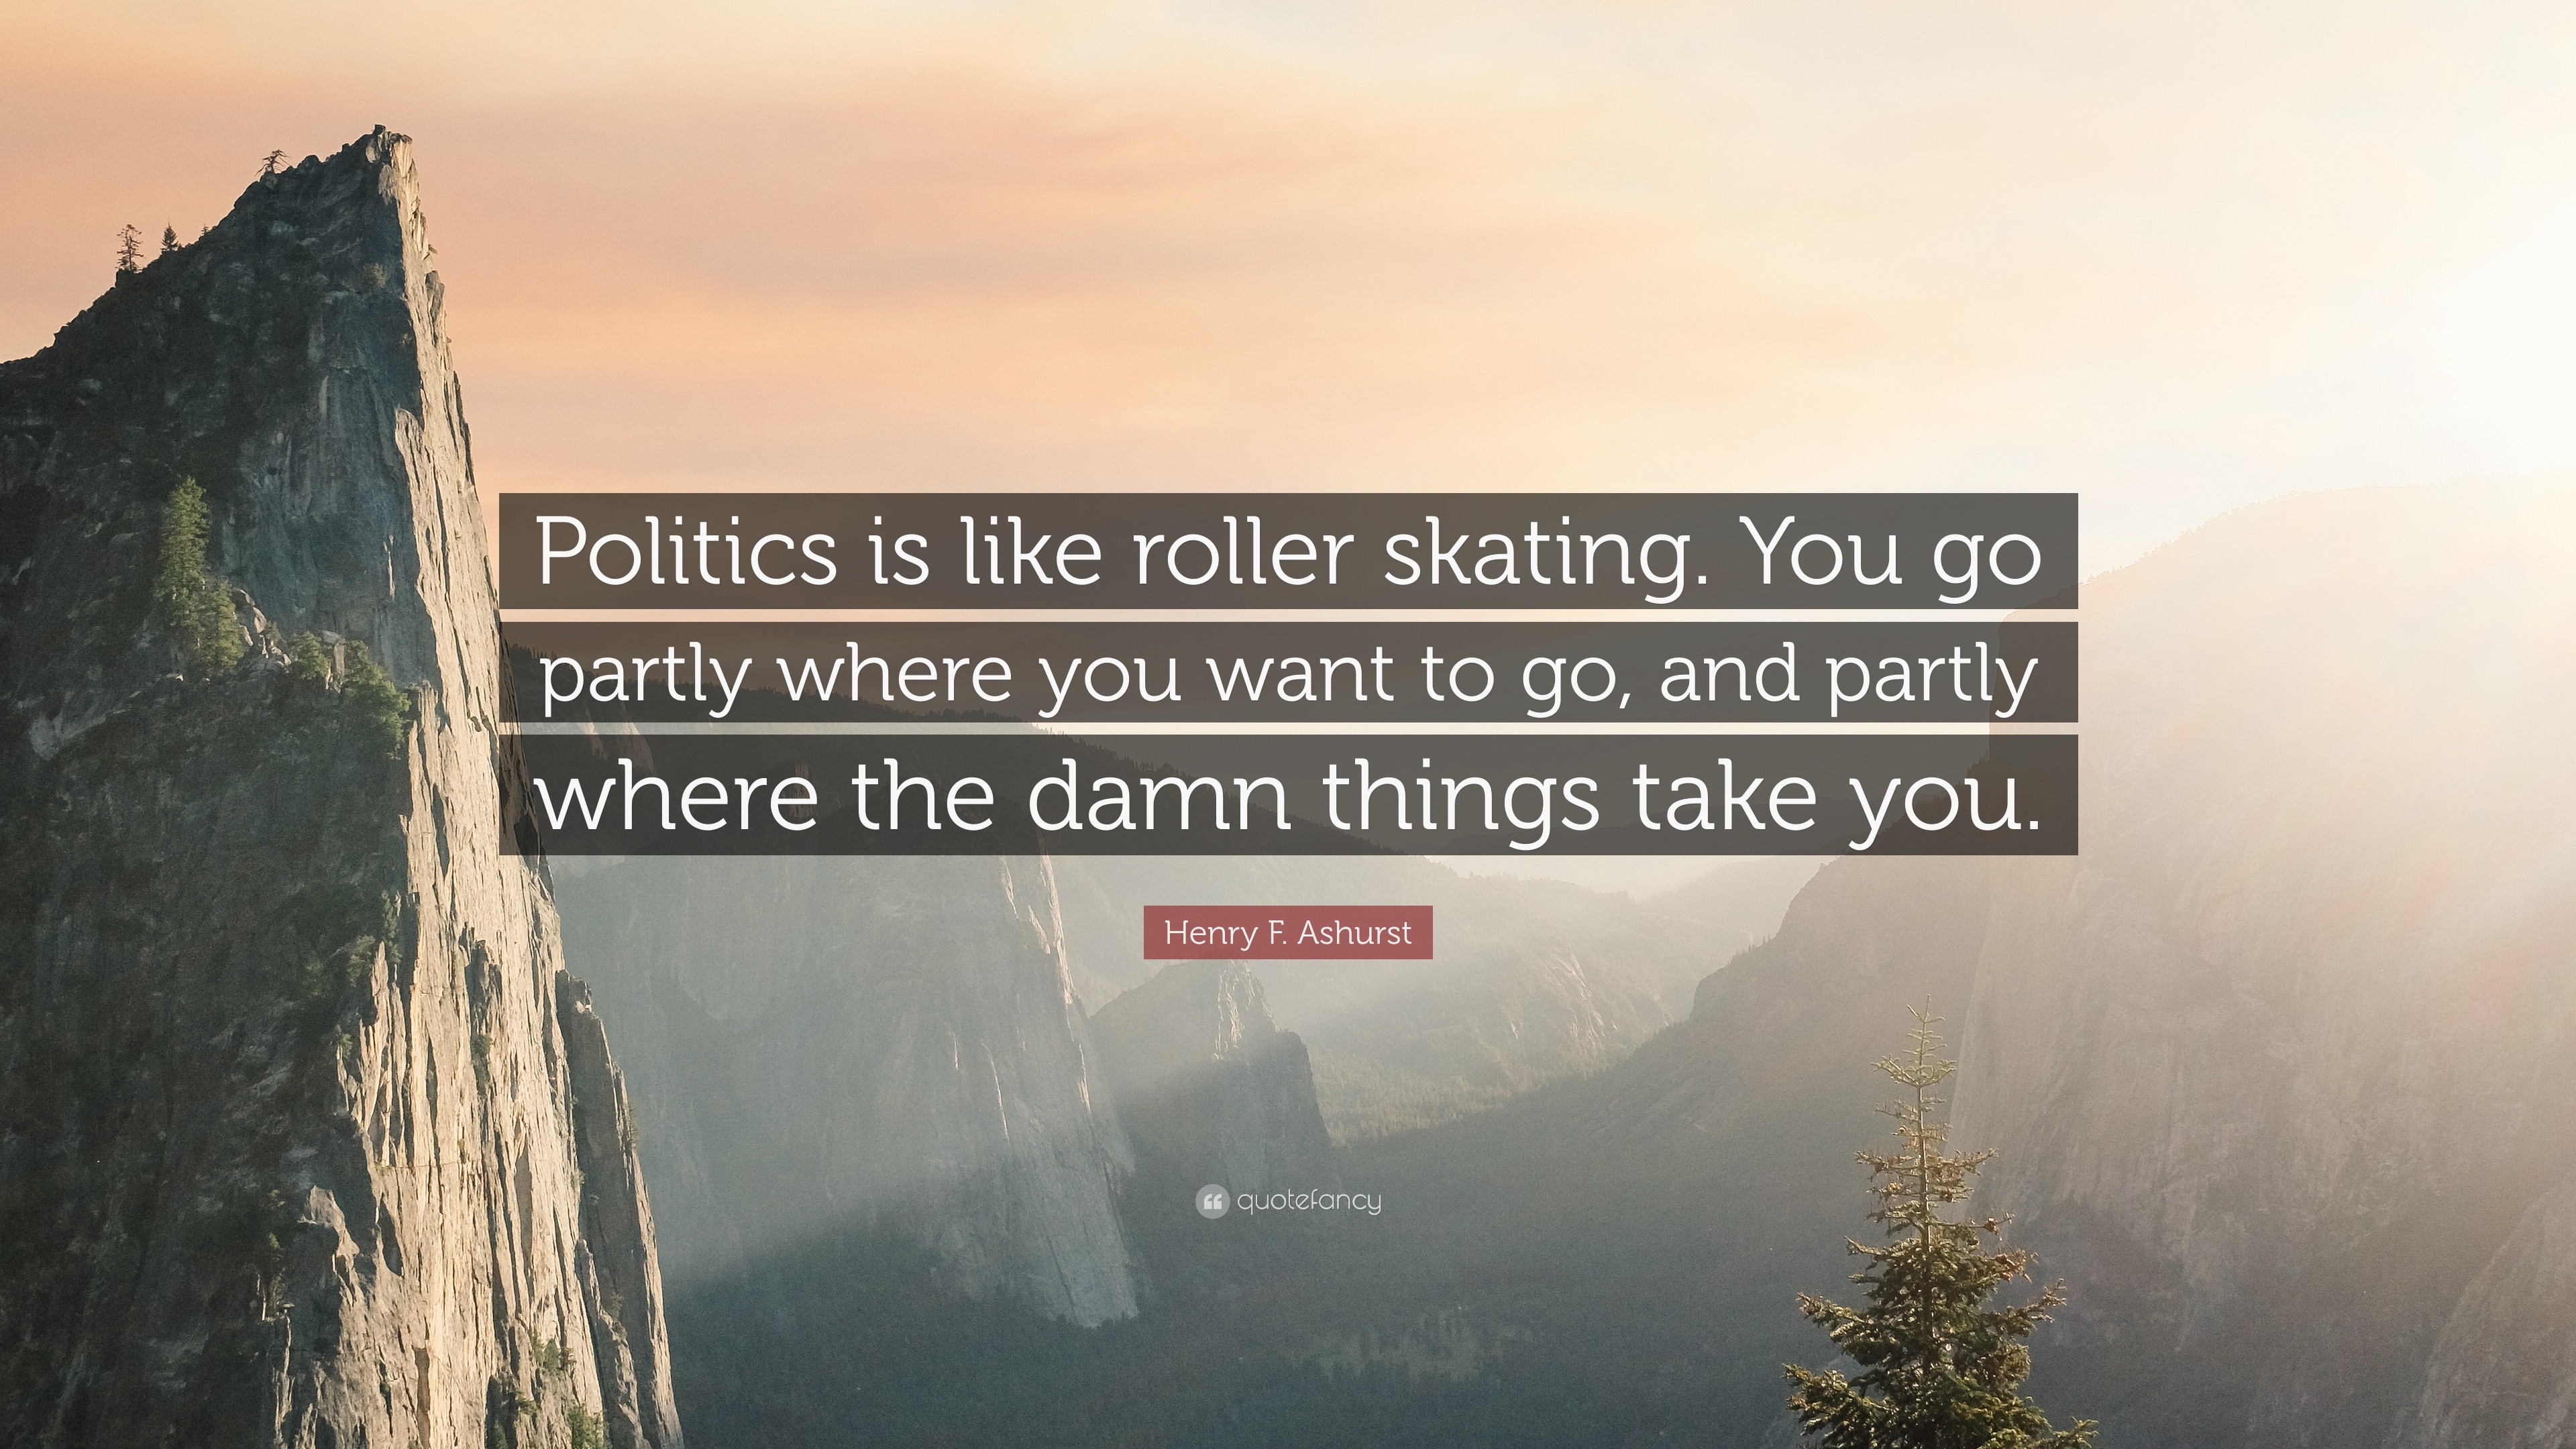 3840x2160 Henry F. Ashurst Quote: “Politics is like roller skating. You go partly